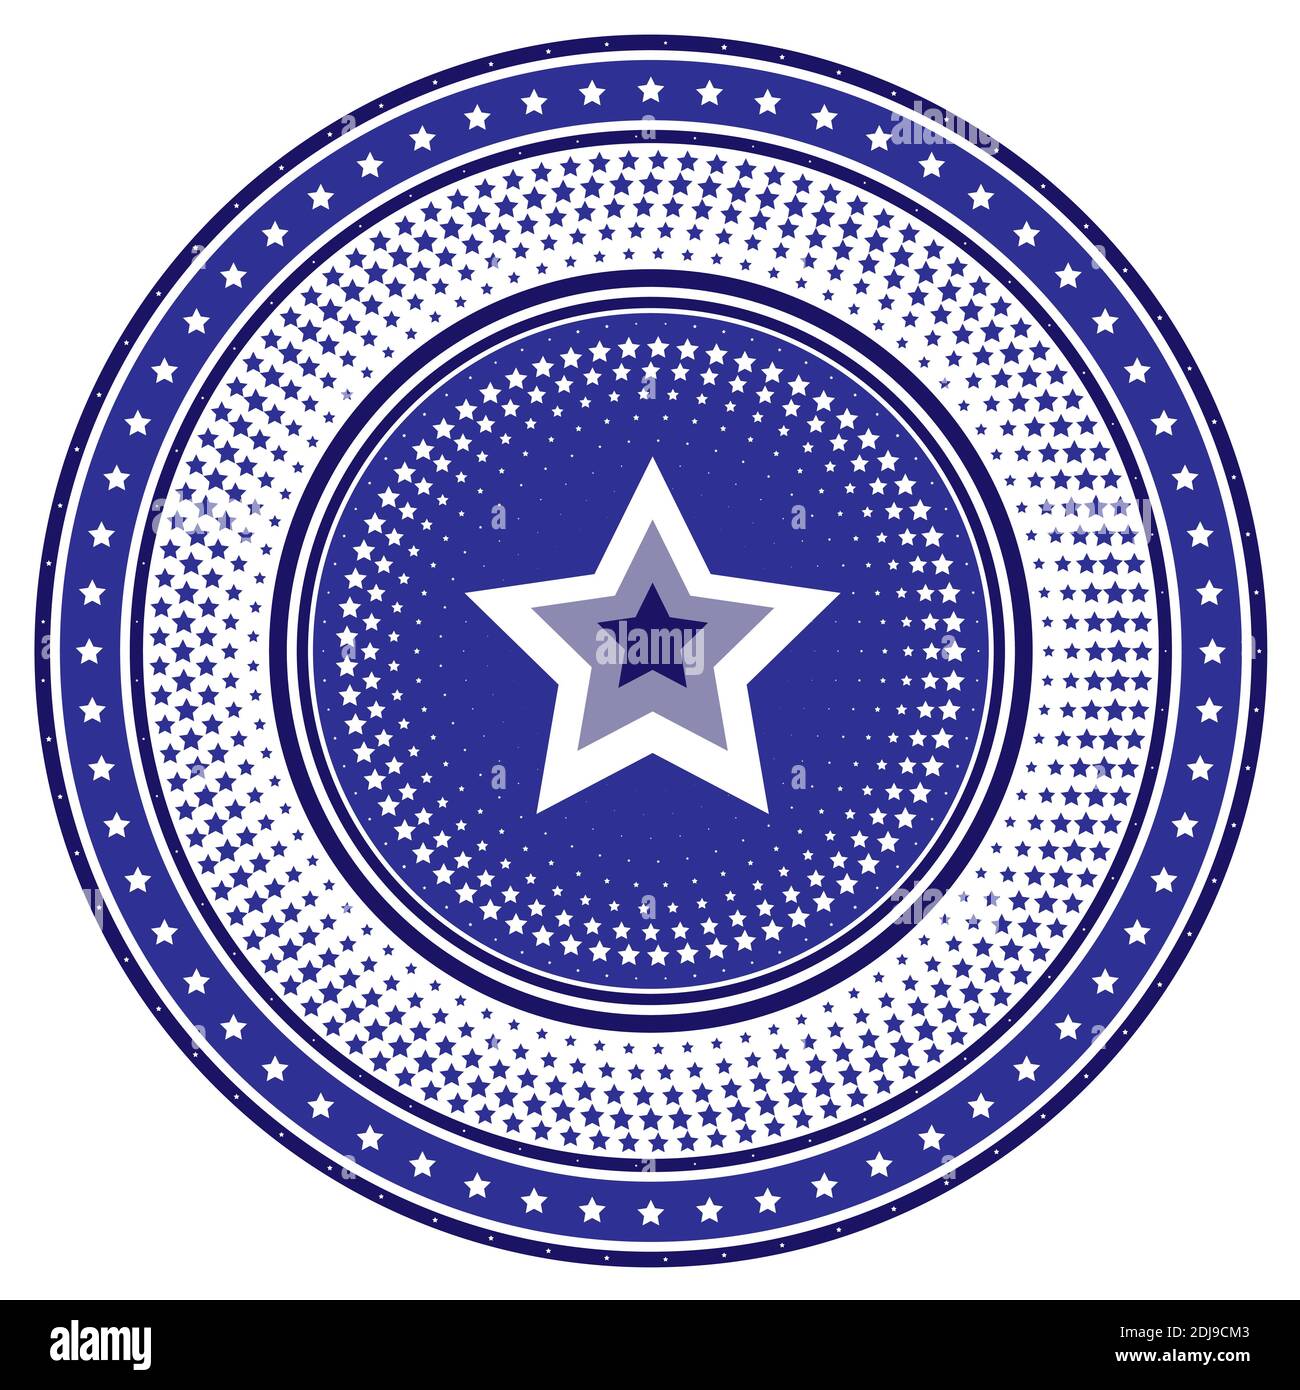 Round die, stamp or chip with blue radial star pattern, vector illustration Stock Vector